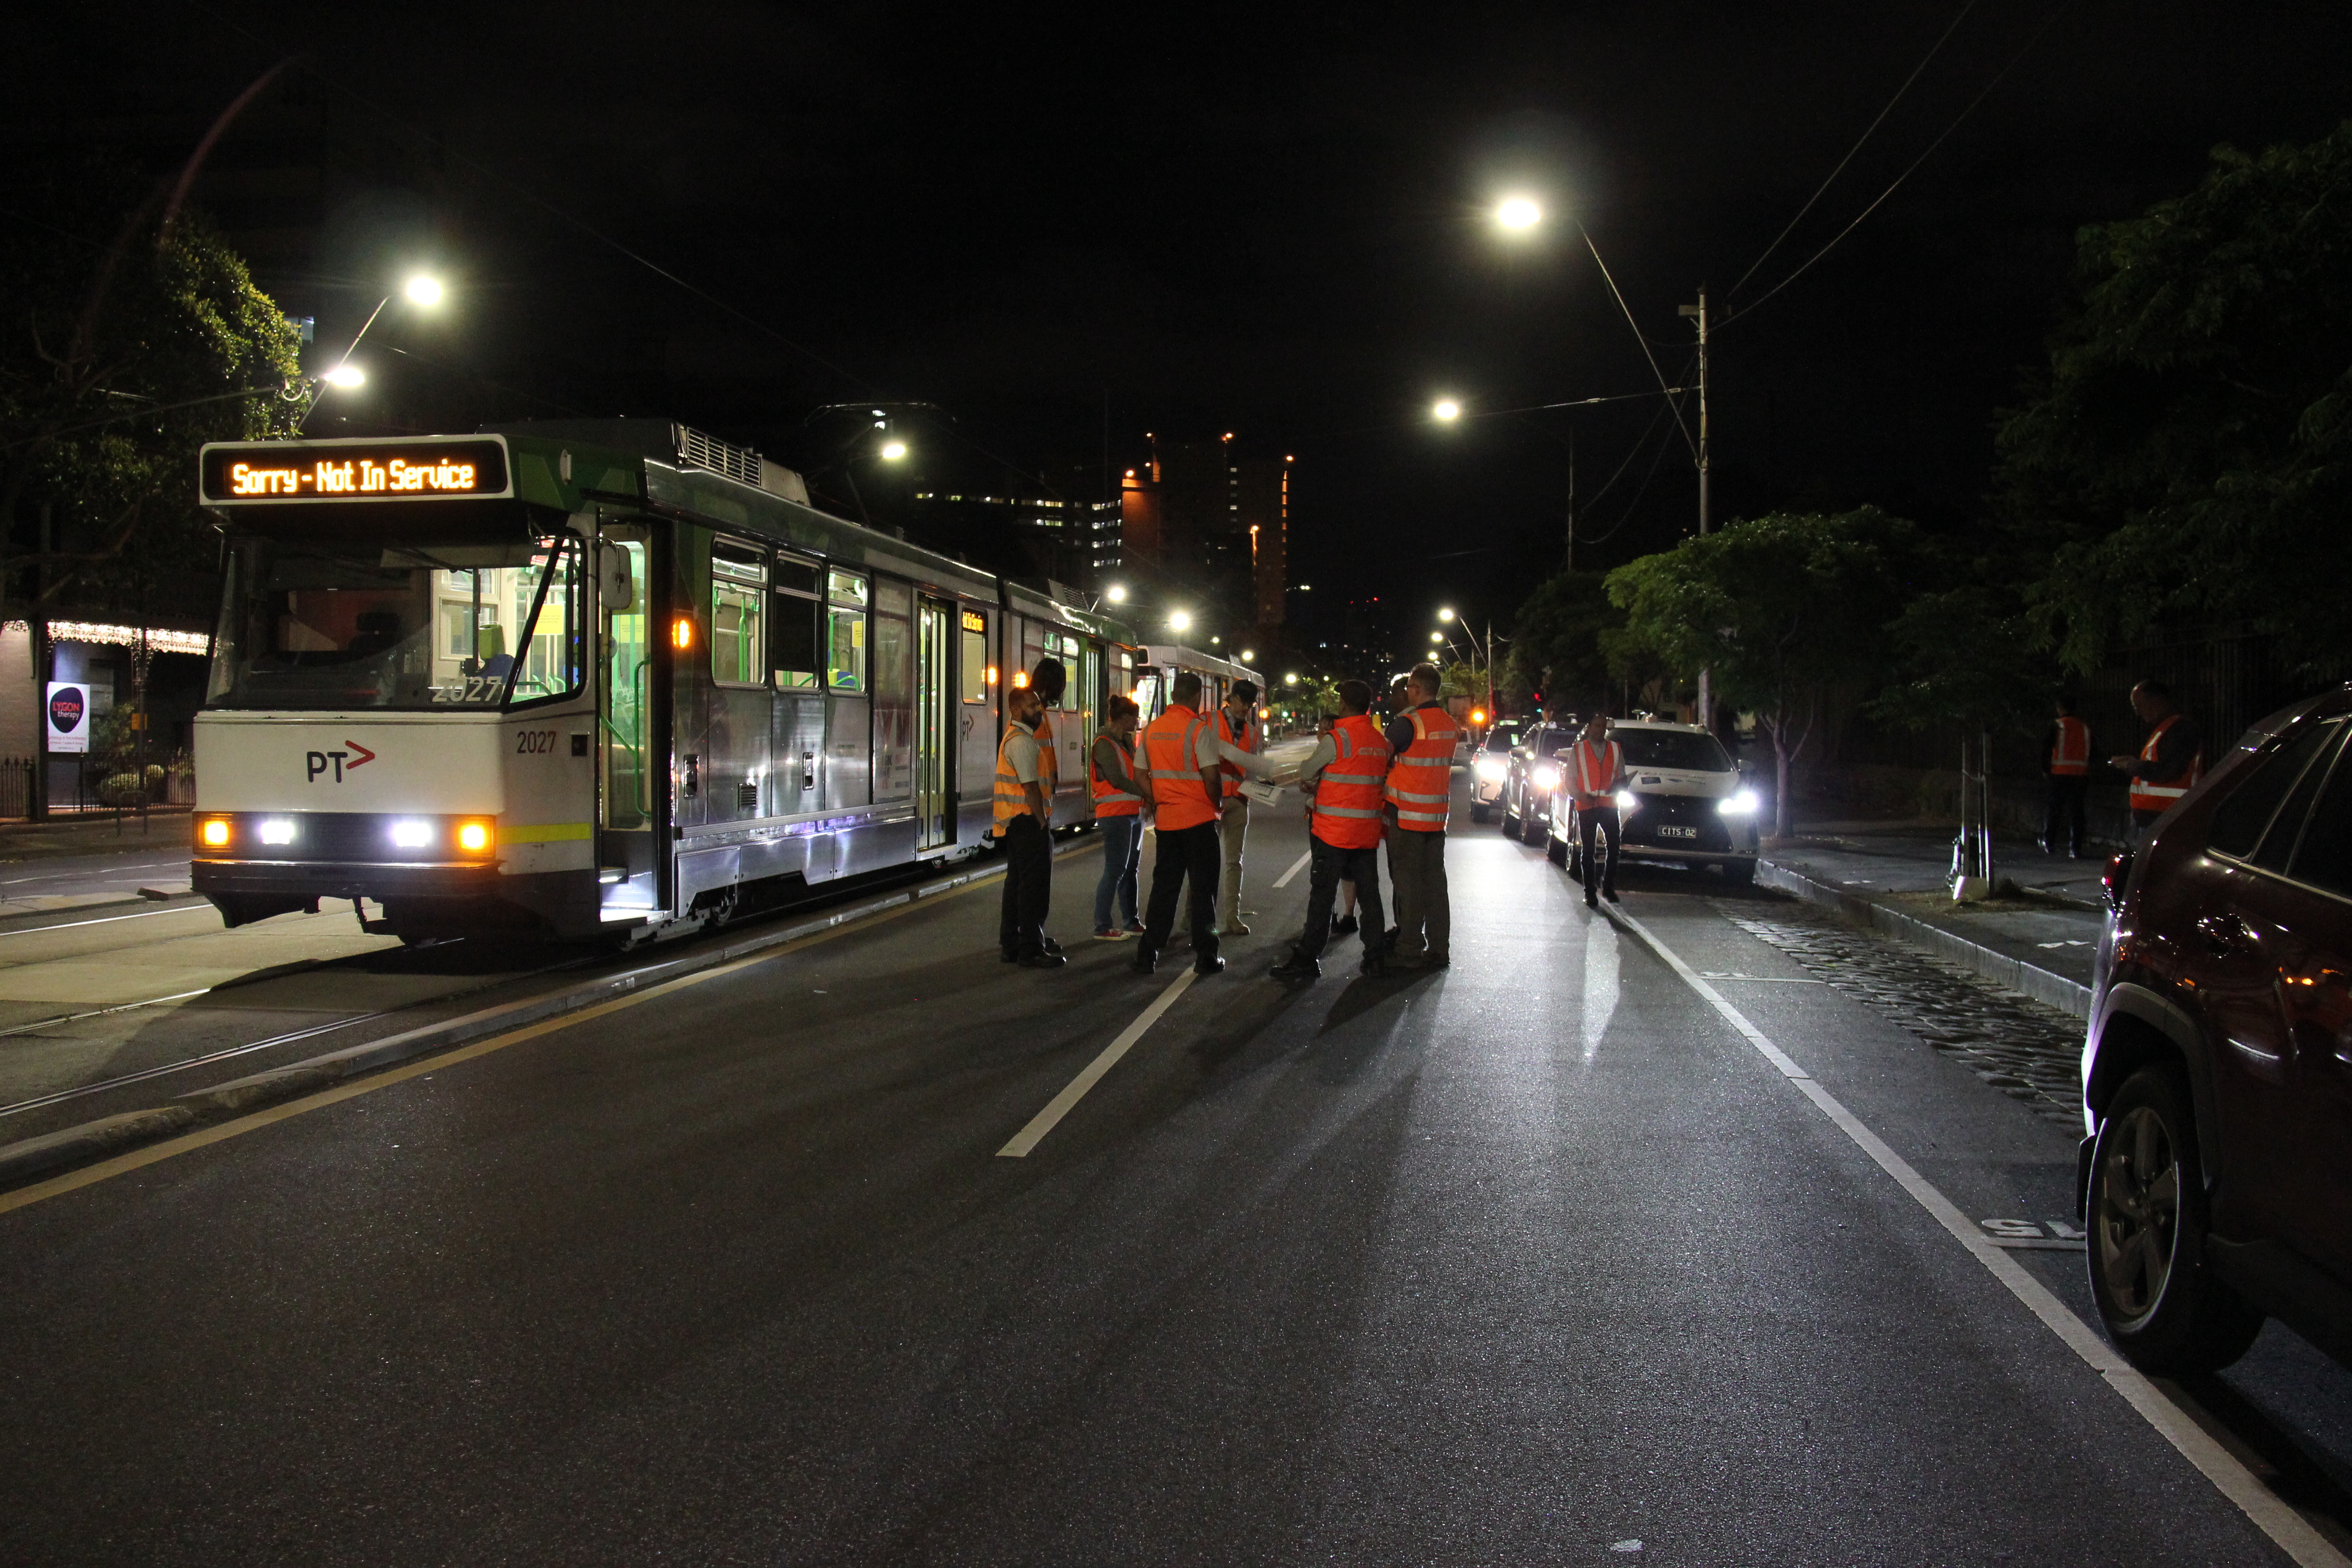 The trials were completed between 1:00 AM and 4:00 AM on Melbourne’s Lygon Street at the end of 2021